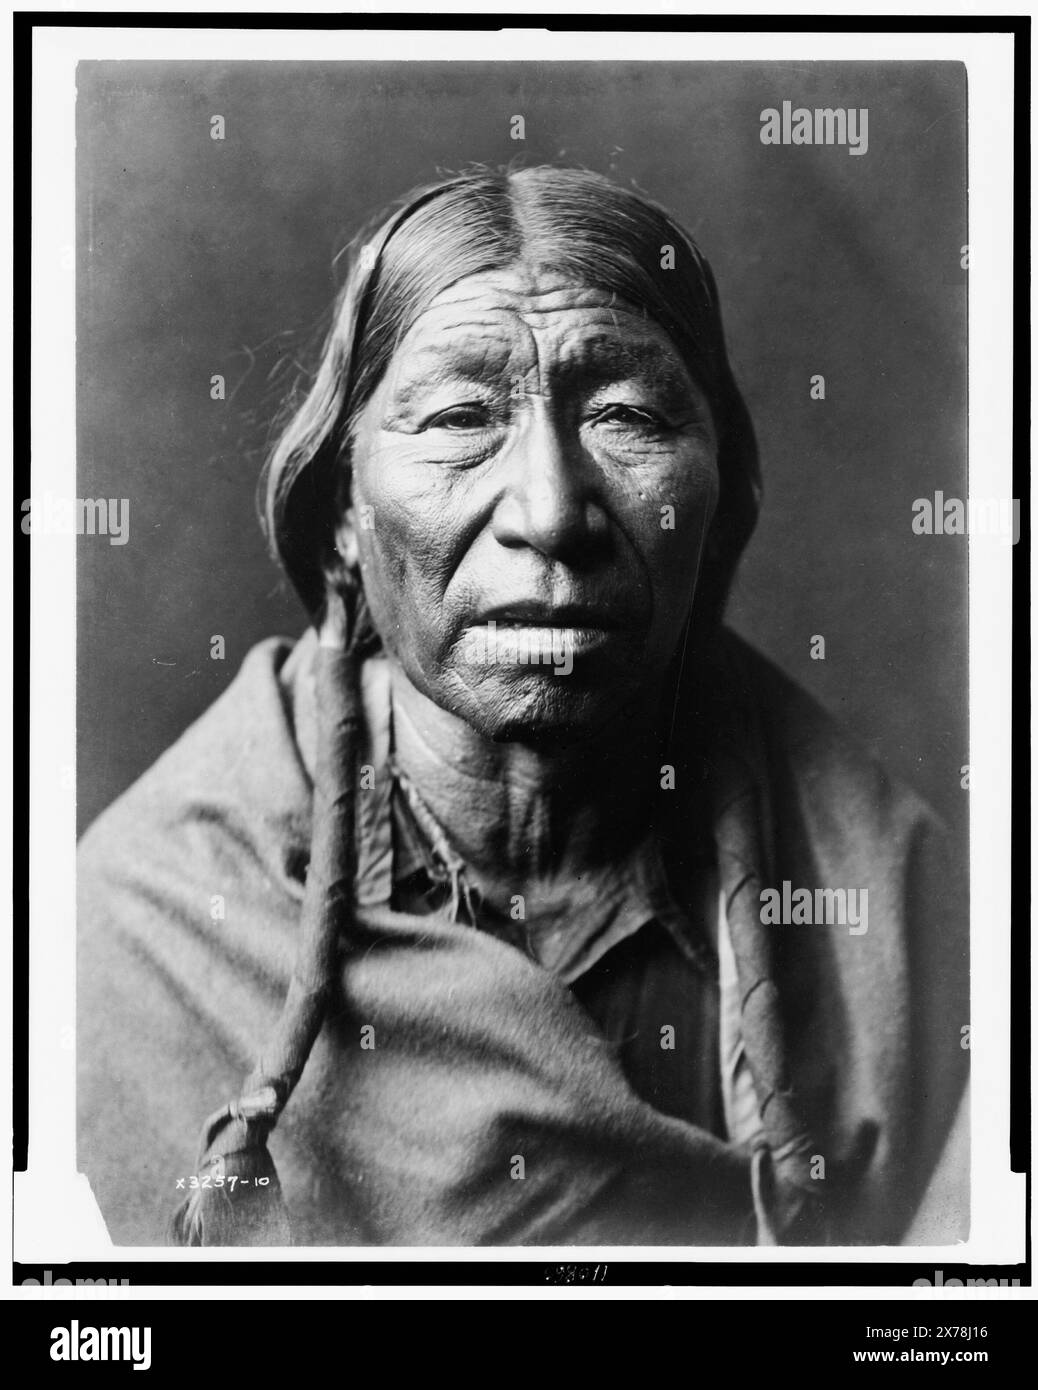 Cheyenne male, facing front, hair in wrapped braids, blanket around shoulders, Edward S. Curtis Collection., Curtis no. 3257-10., Published in: The North American Indian / Edward S. Curtis. [Seattle, Wash.] : Edward S. Curtis, 1907-30, suppl., v. 6, p. 210.. Indians of North America, 1910. , Cheyenne Indians, 1910. Stock Photo